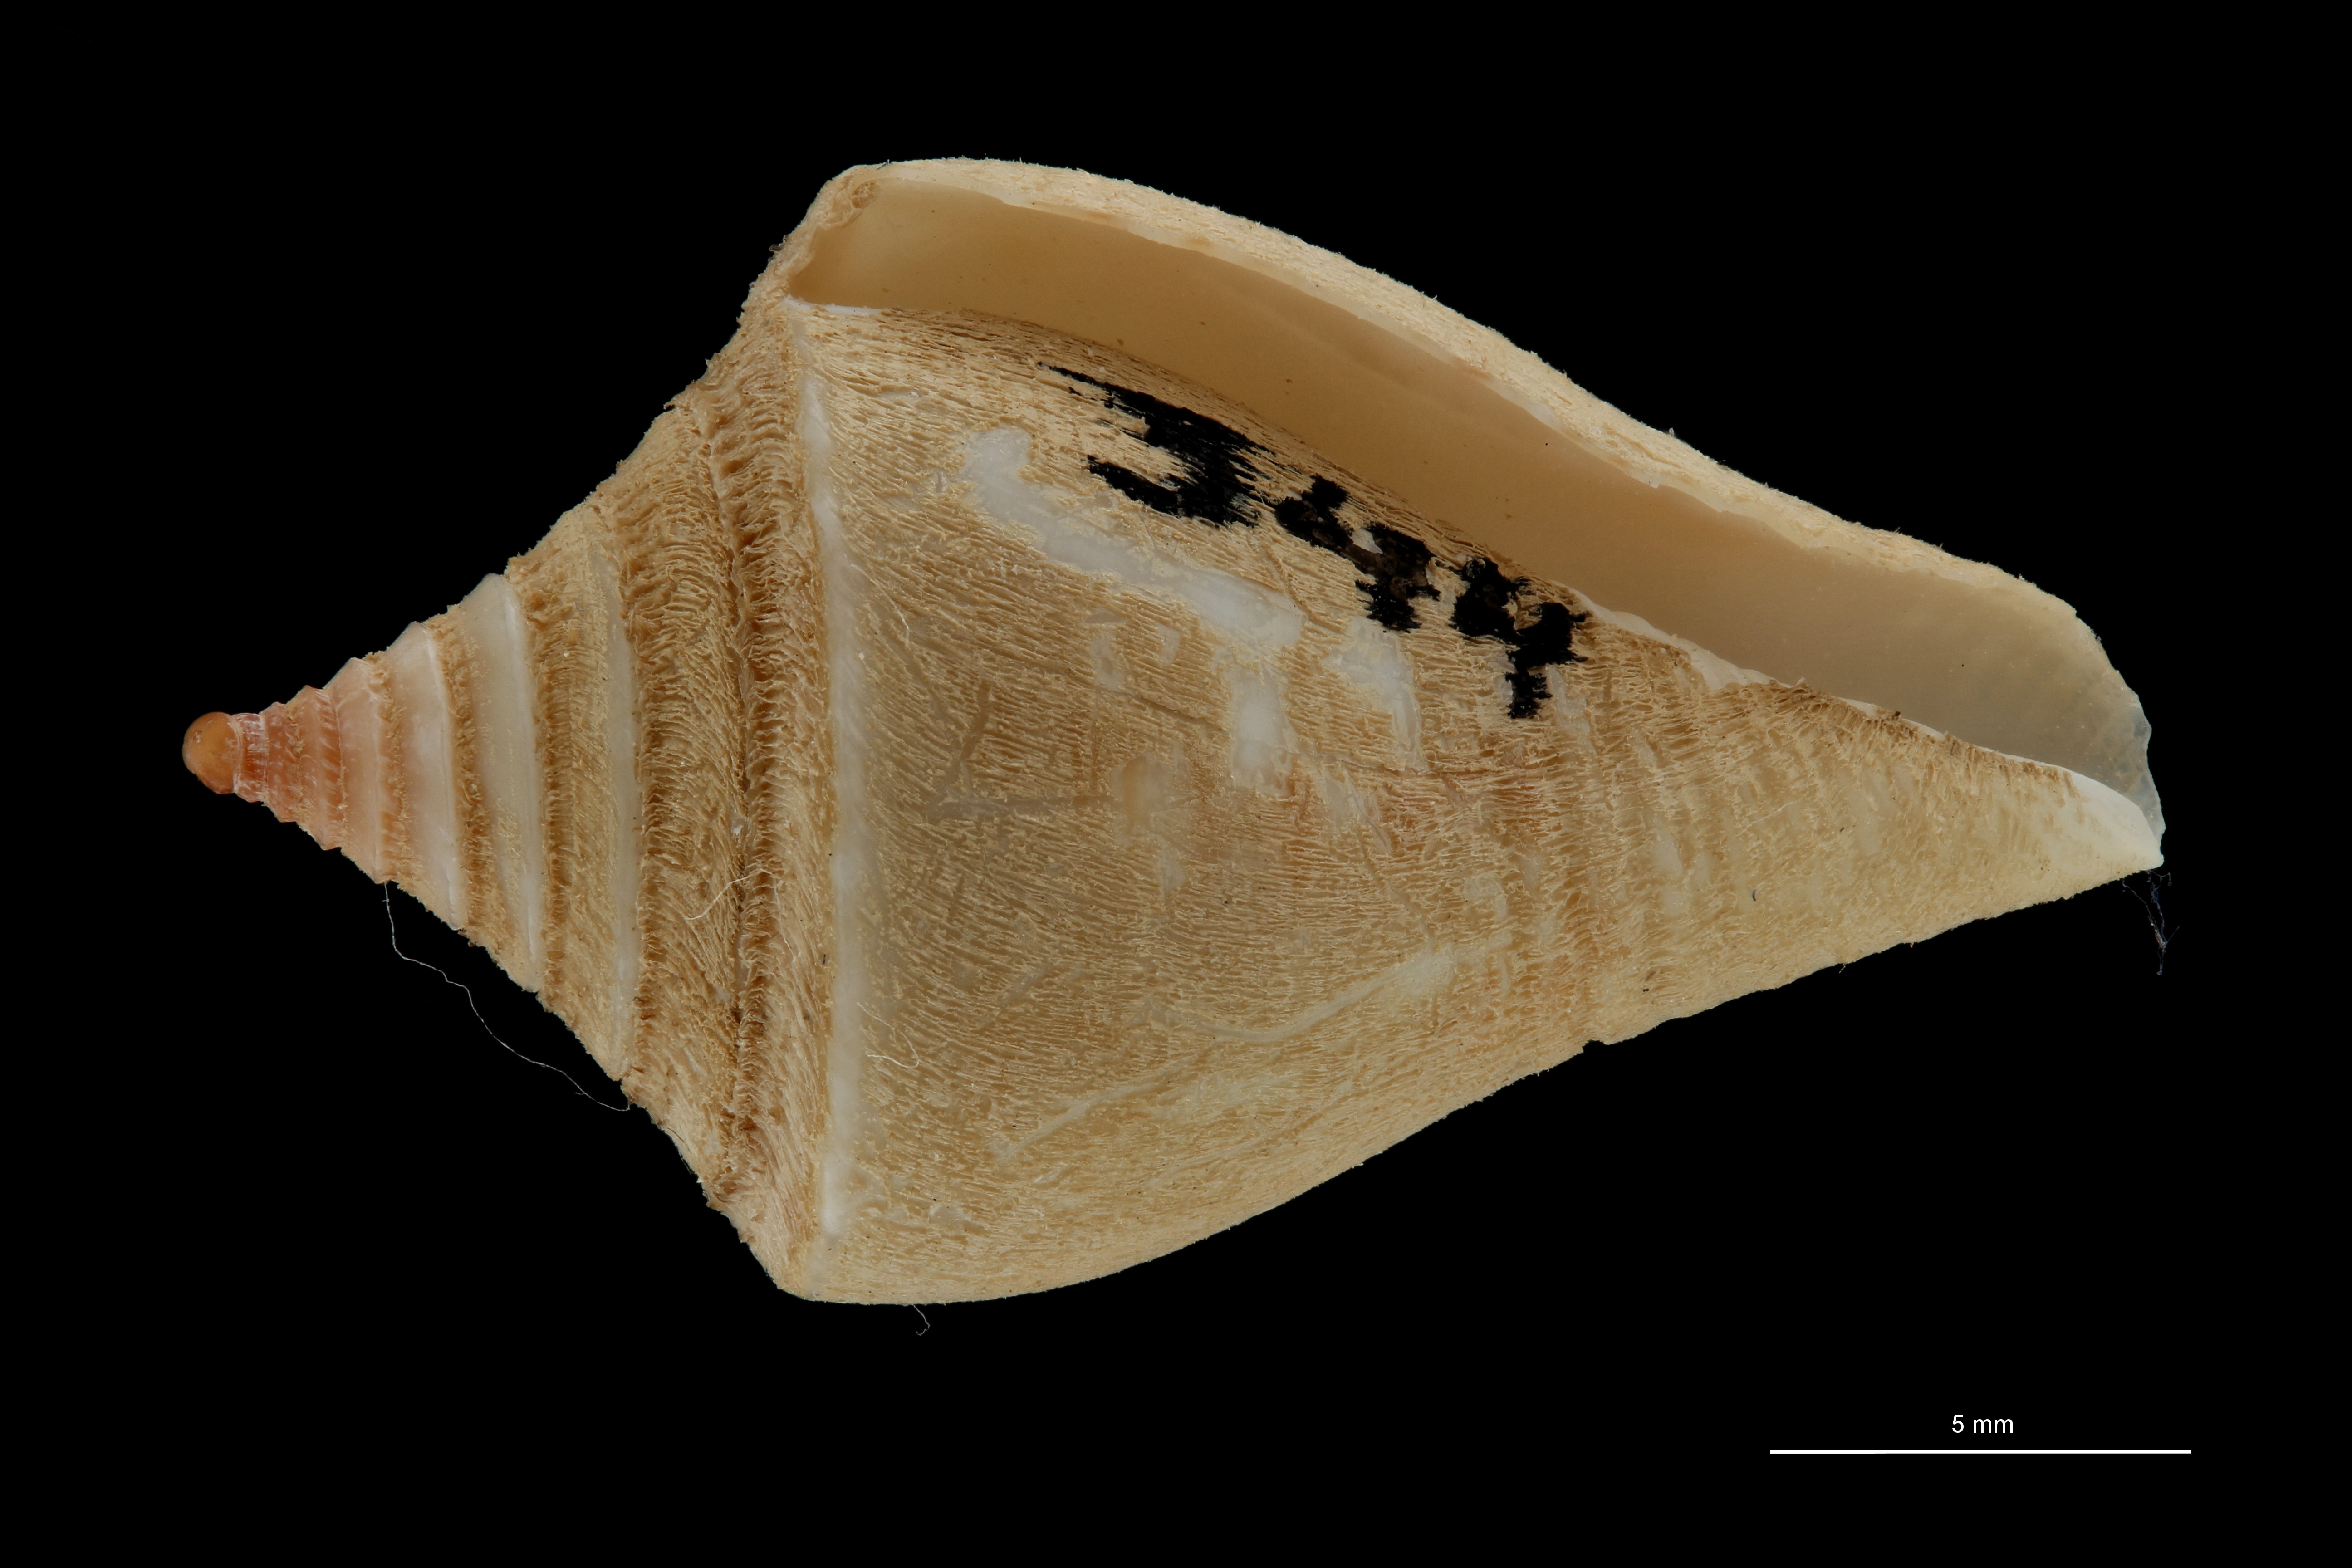 BE-RBINS-INV PARATYPE MT.3041 Conus rostratus VENTRAL ZS PMax Scaled.jpg